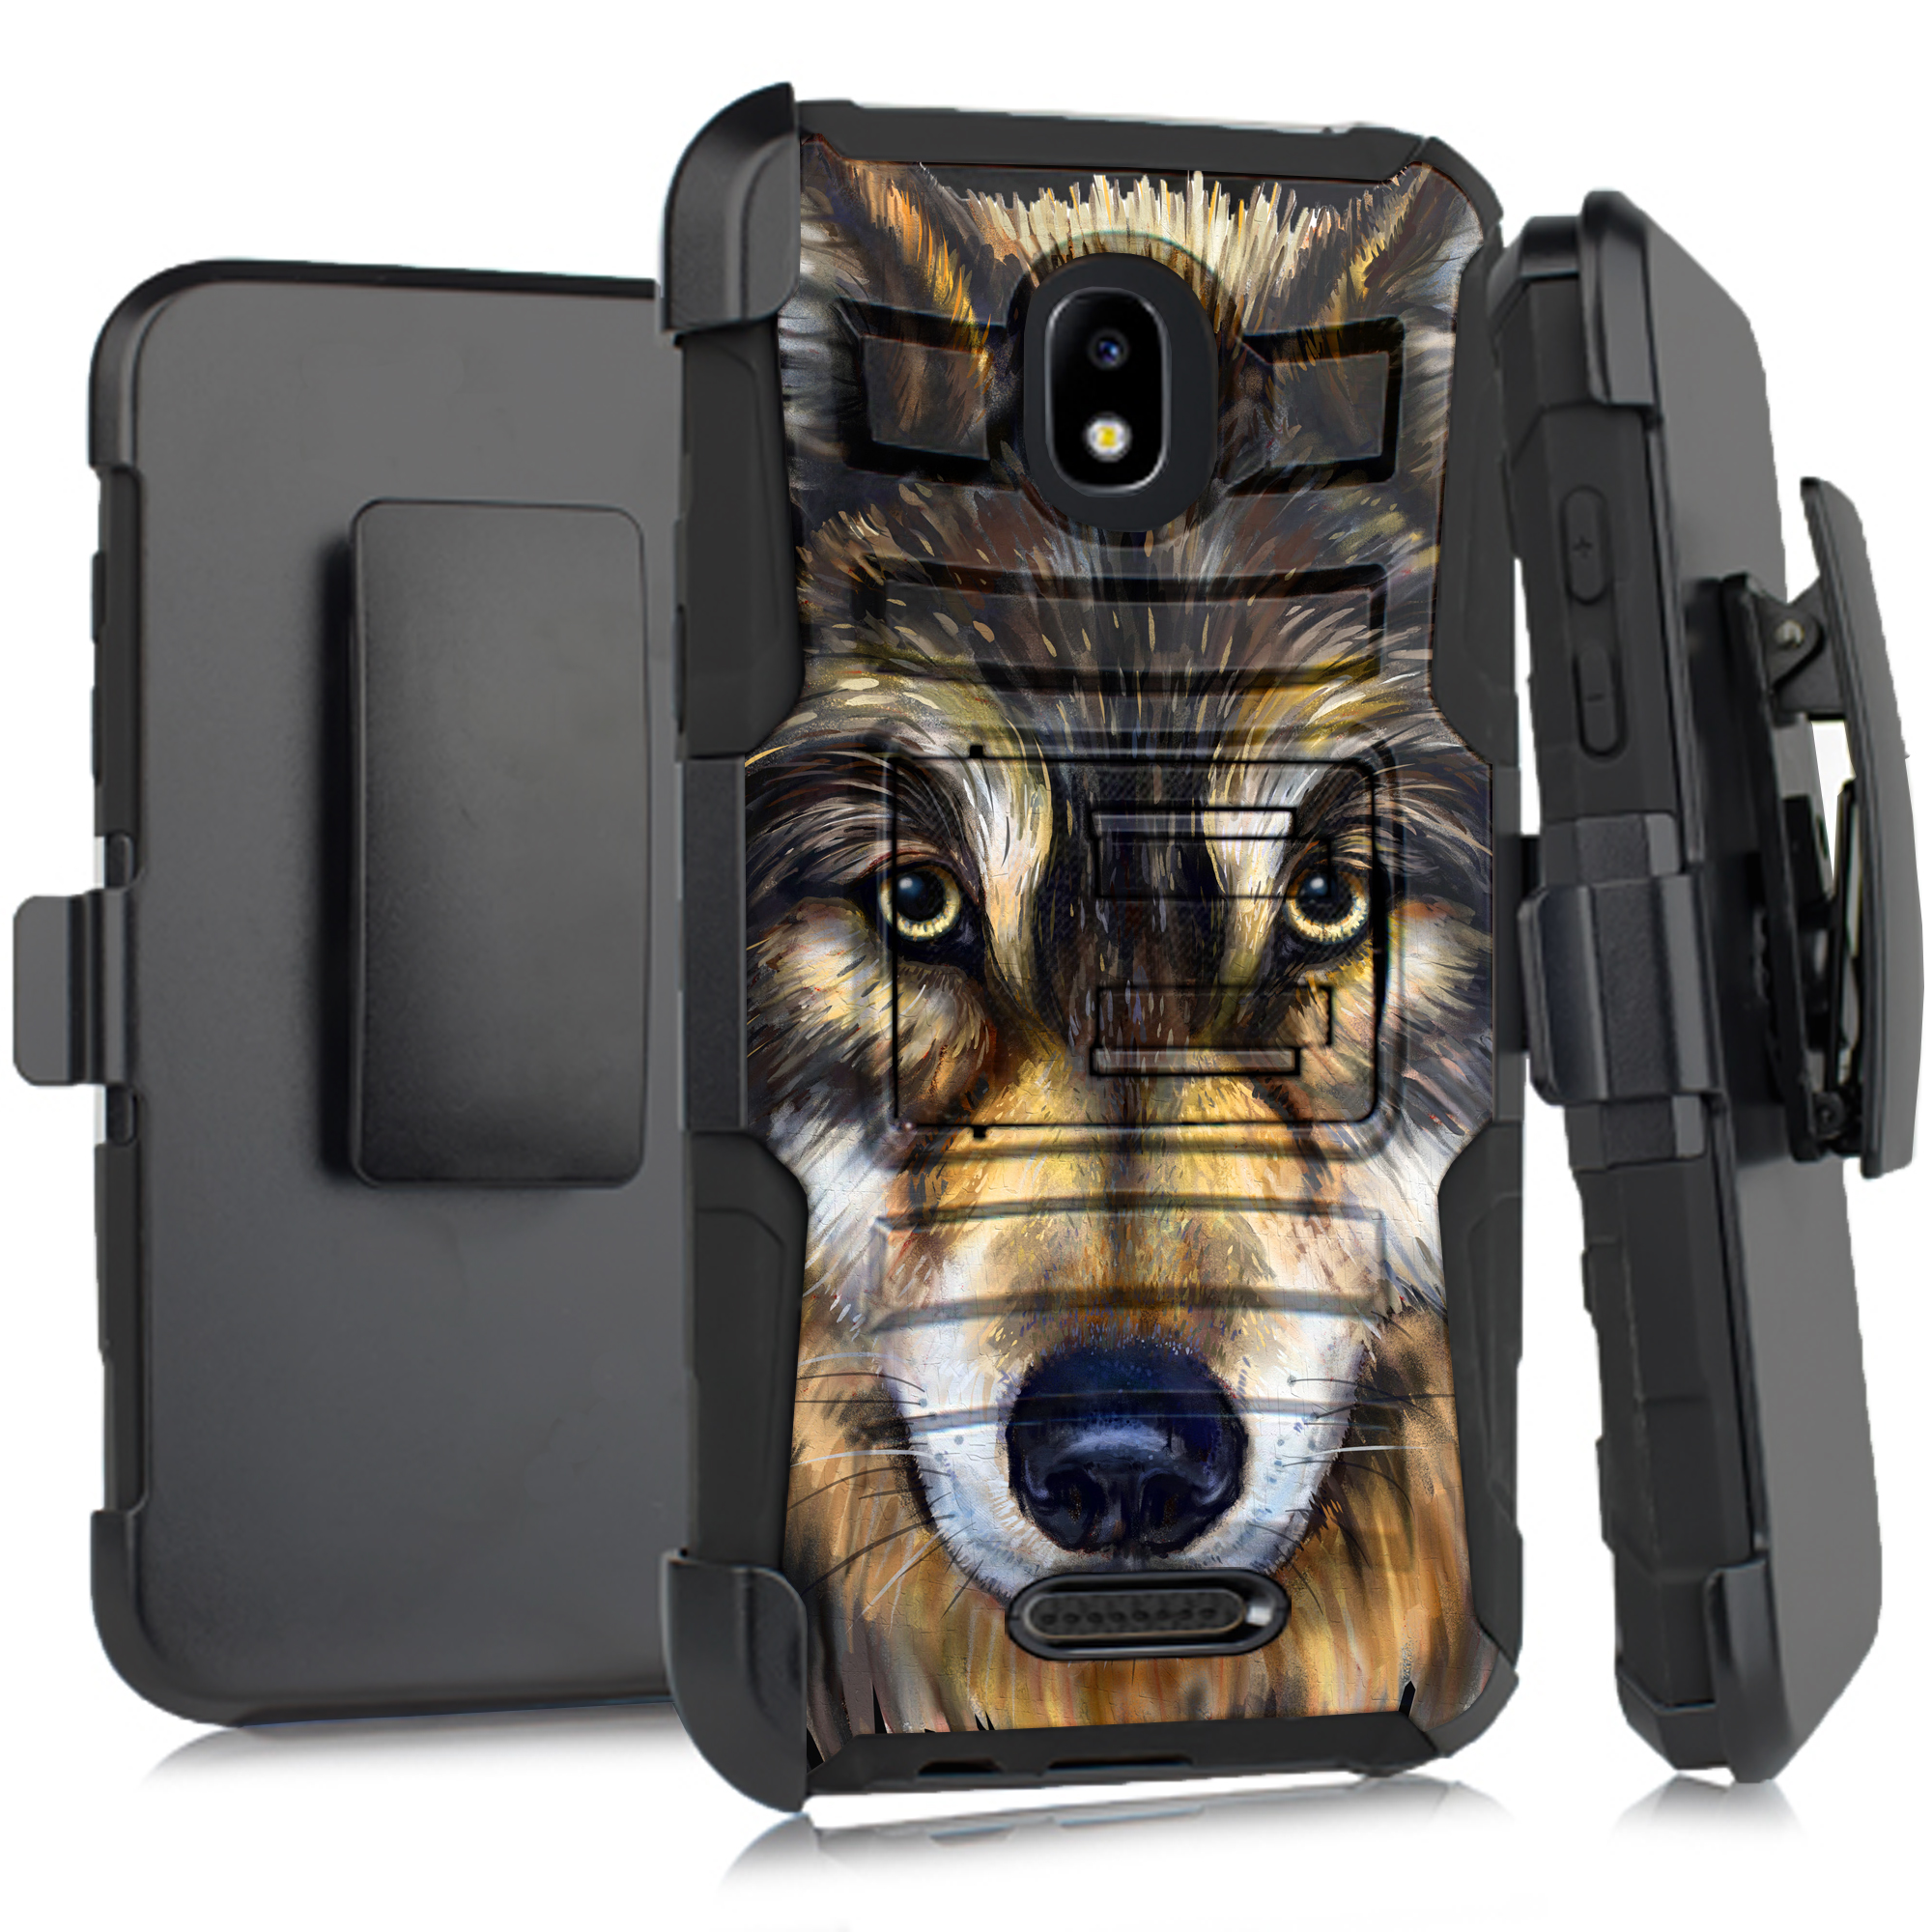 DALUX Hybrid Kickstand Holster Phone Case Compatible with Cricket Vision 2 U304AC - Wolf Face - image 1 of 1